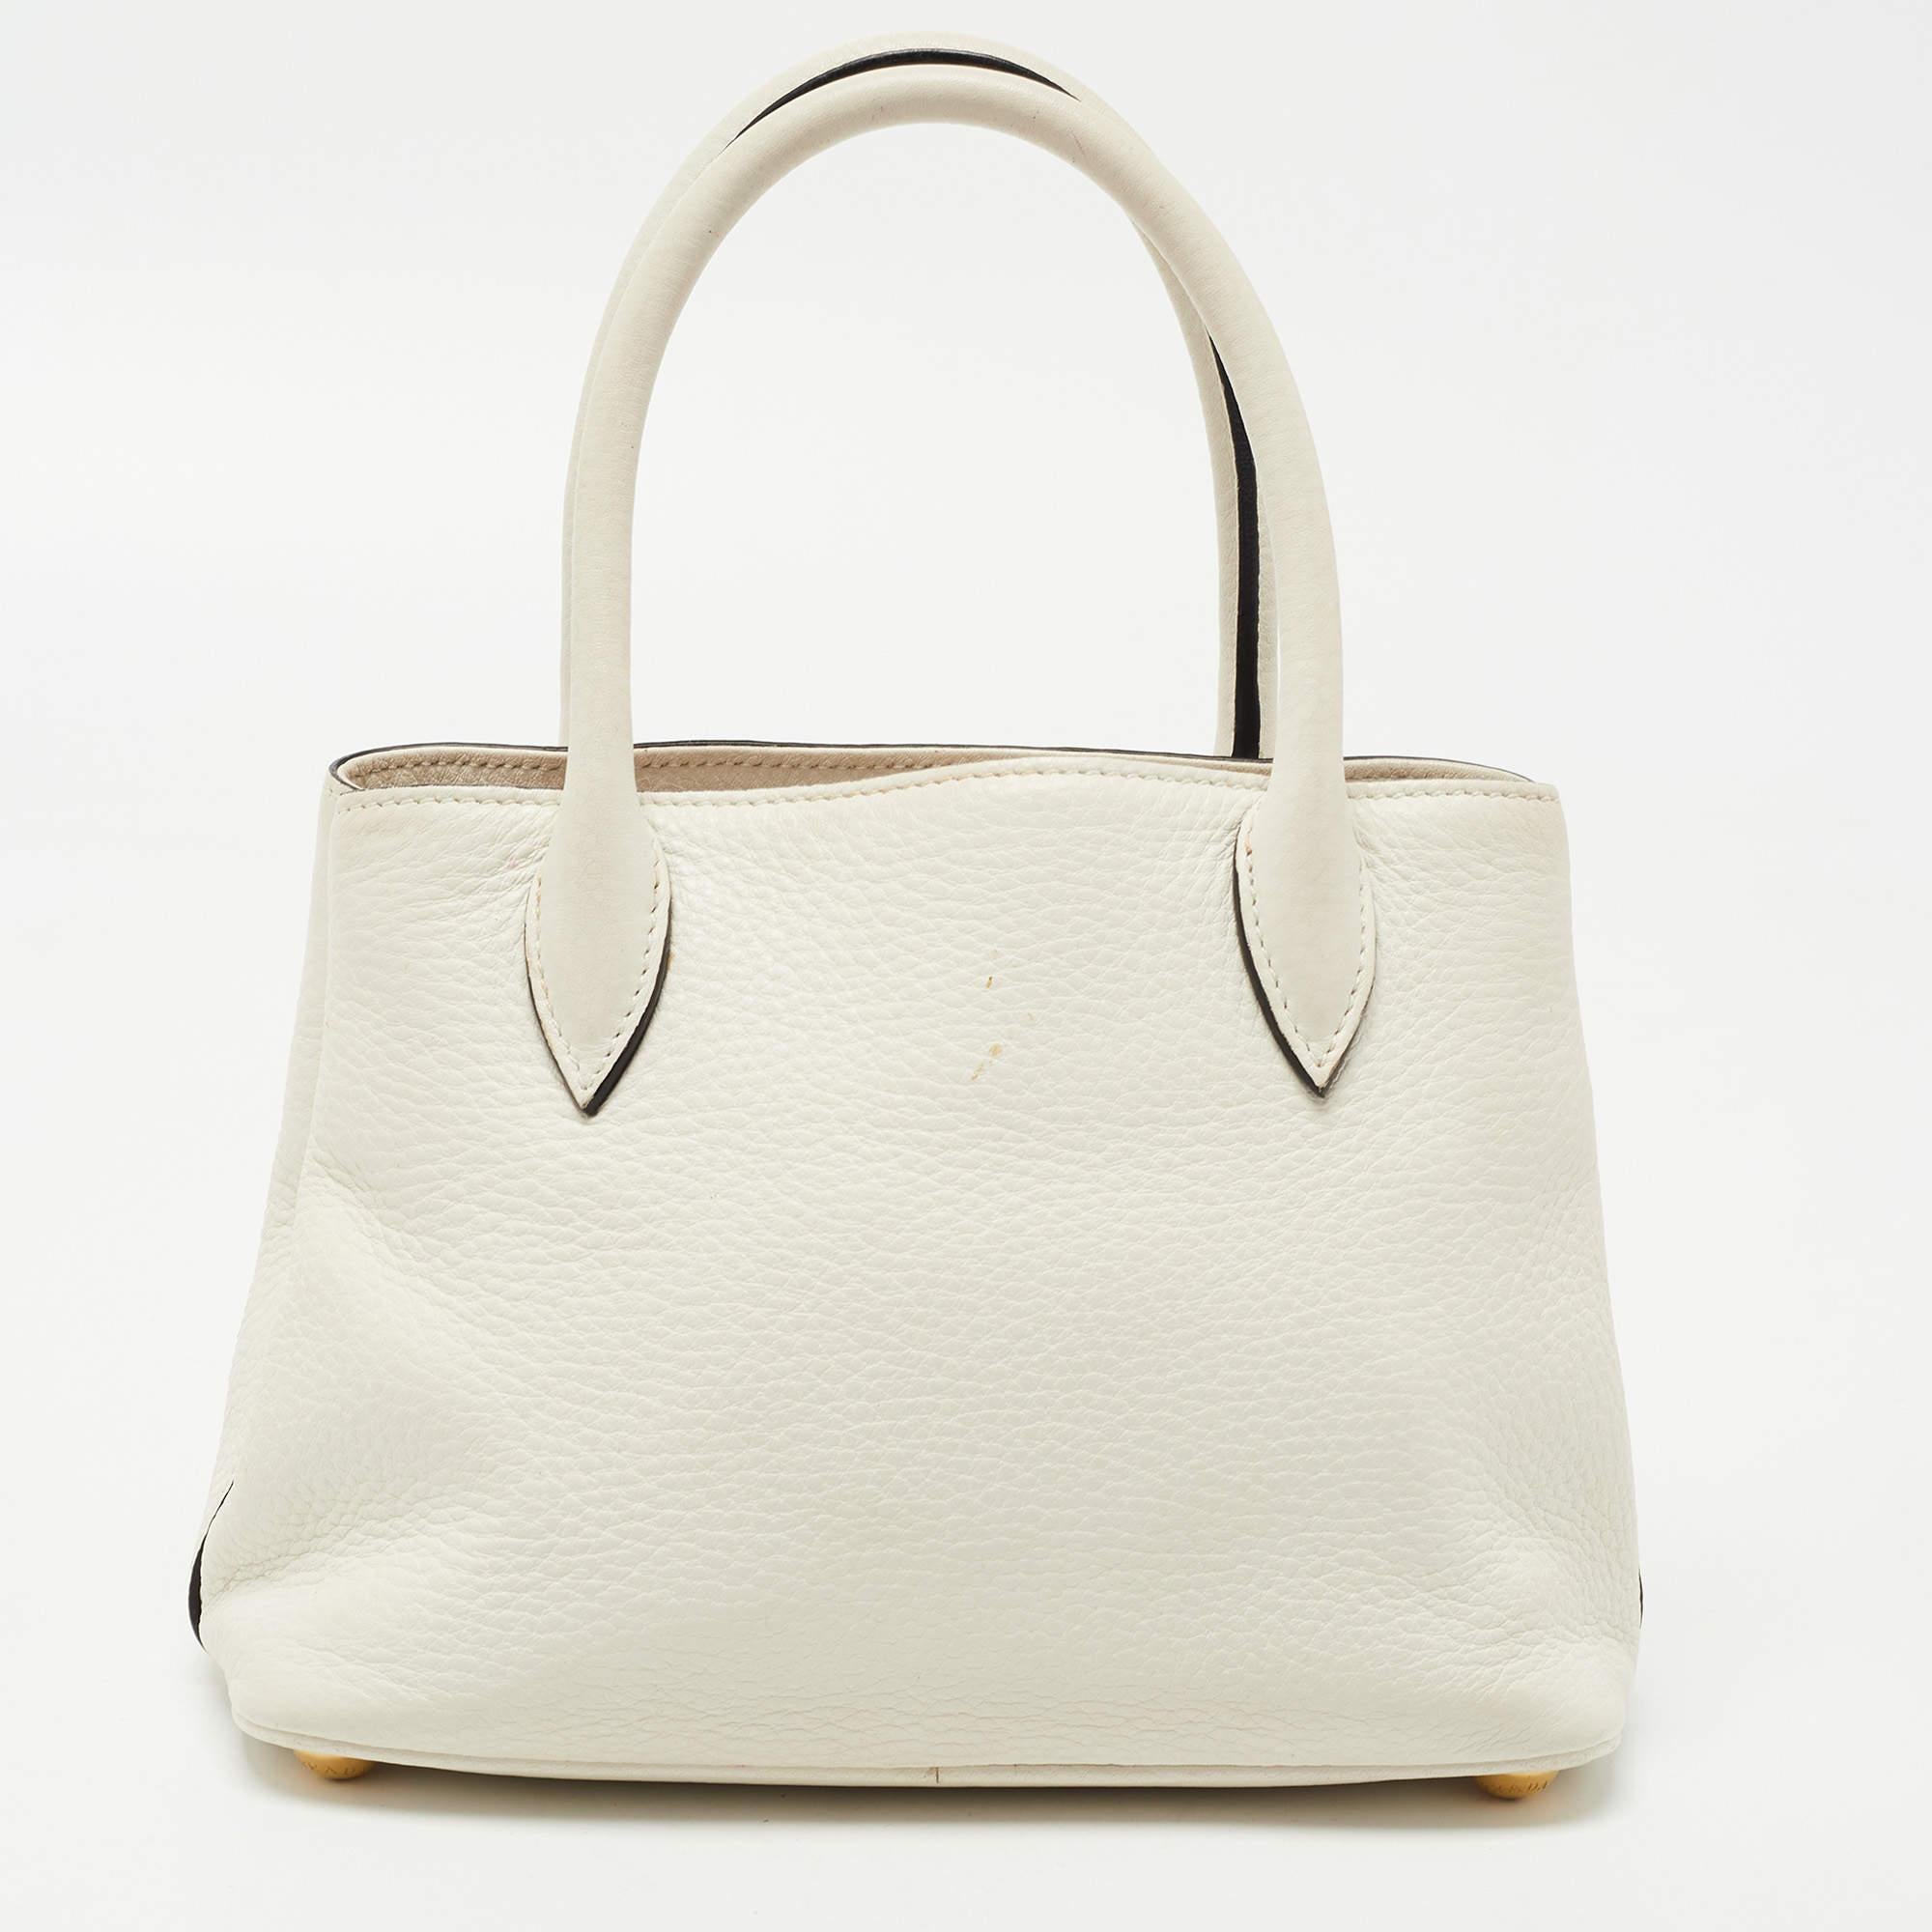 Timeless yet immediately distinctive, this tote will be a reliable accessory. Filled with functional details, the eye-catching and enduring details of this bag make it a wise investment.

Includes: Detachable Strap
